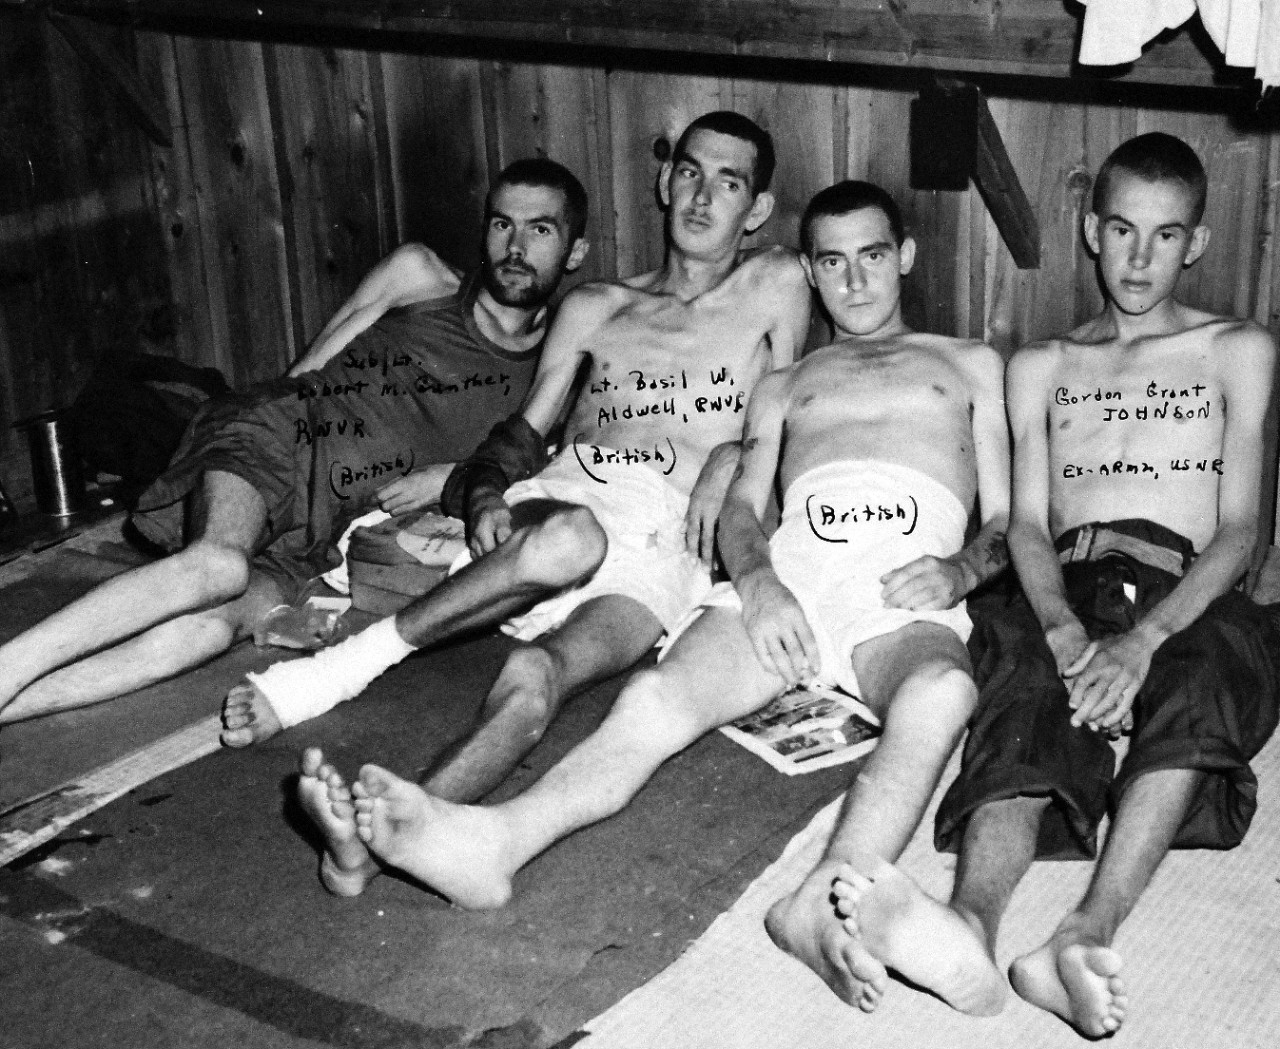 80-G-490448:  Allied Prisoner of War Camp, Omori, Japan, 1945.  Allied prisoners of war, suffering from malnutrition and other disorders as seen after their rescue from the Omori Camp, Tokyo, Japan, area by a U.S. Navy Rescue Mission headed by Robert Simpson and Commander Harold Stassen.  Treatment of the prisoners was described as inquisitional form of barbarism.  Four gaunt Allied prisoners weakly hold themselves up in their beds.  Left to right:  Sub/Lieutenant; Robert M. Gunther, RNVR (British); Lieutenant Basil W. Aldwell, RNVR (British); Unknown (British); and Ex-ARM2 Gordon Grant Johnson, USNR.  Released August 29, 1945.  Official U.S. Navy photograph, now in the collection of the National Archives.   (2015/11/10).